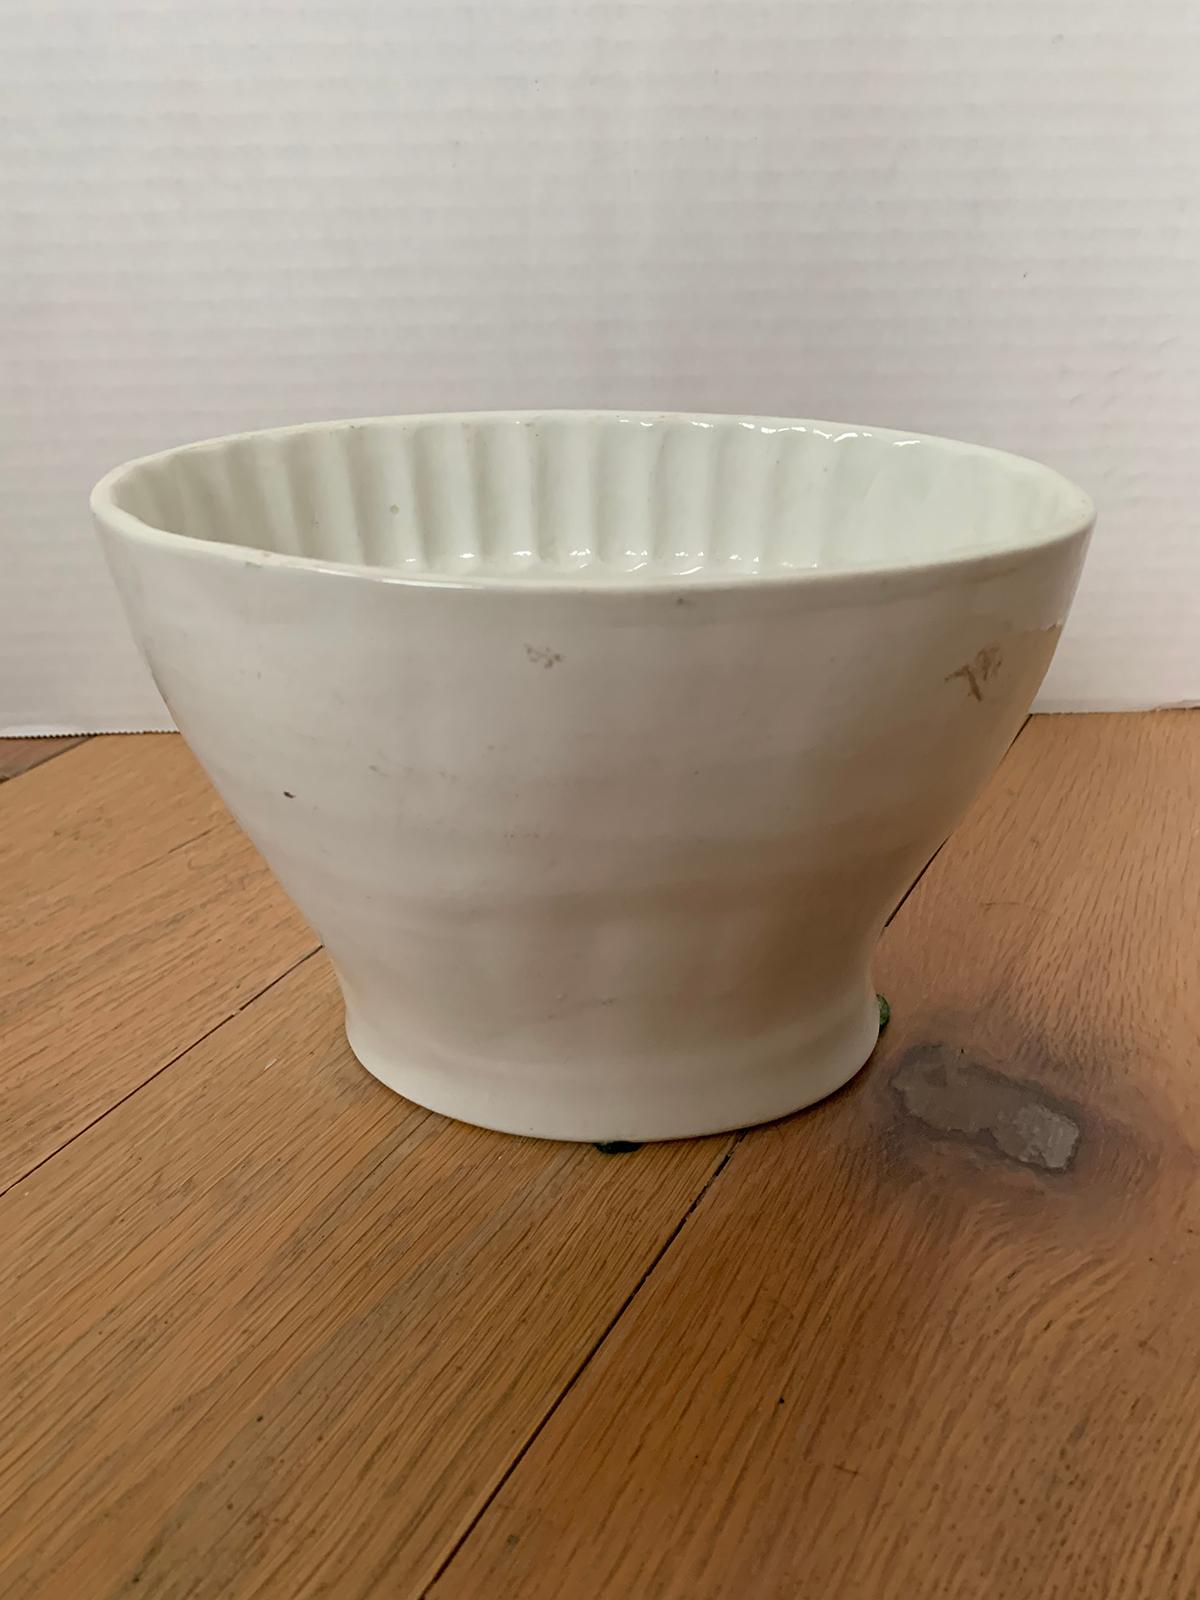 19th century circa 1860 white ironstone pudding / jelly mold, unmarked.